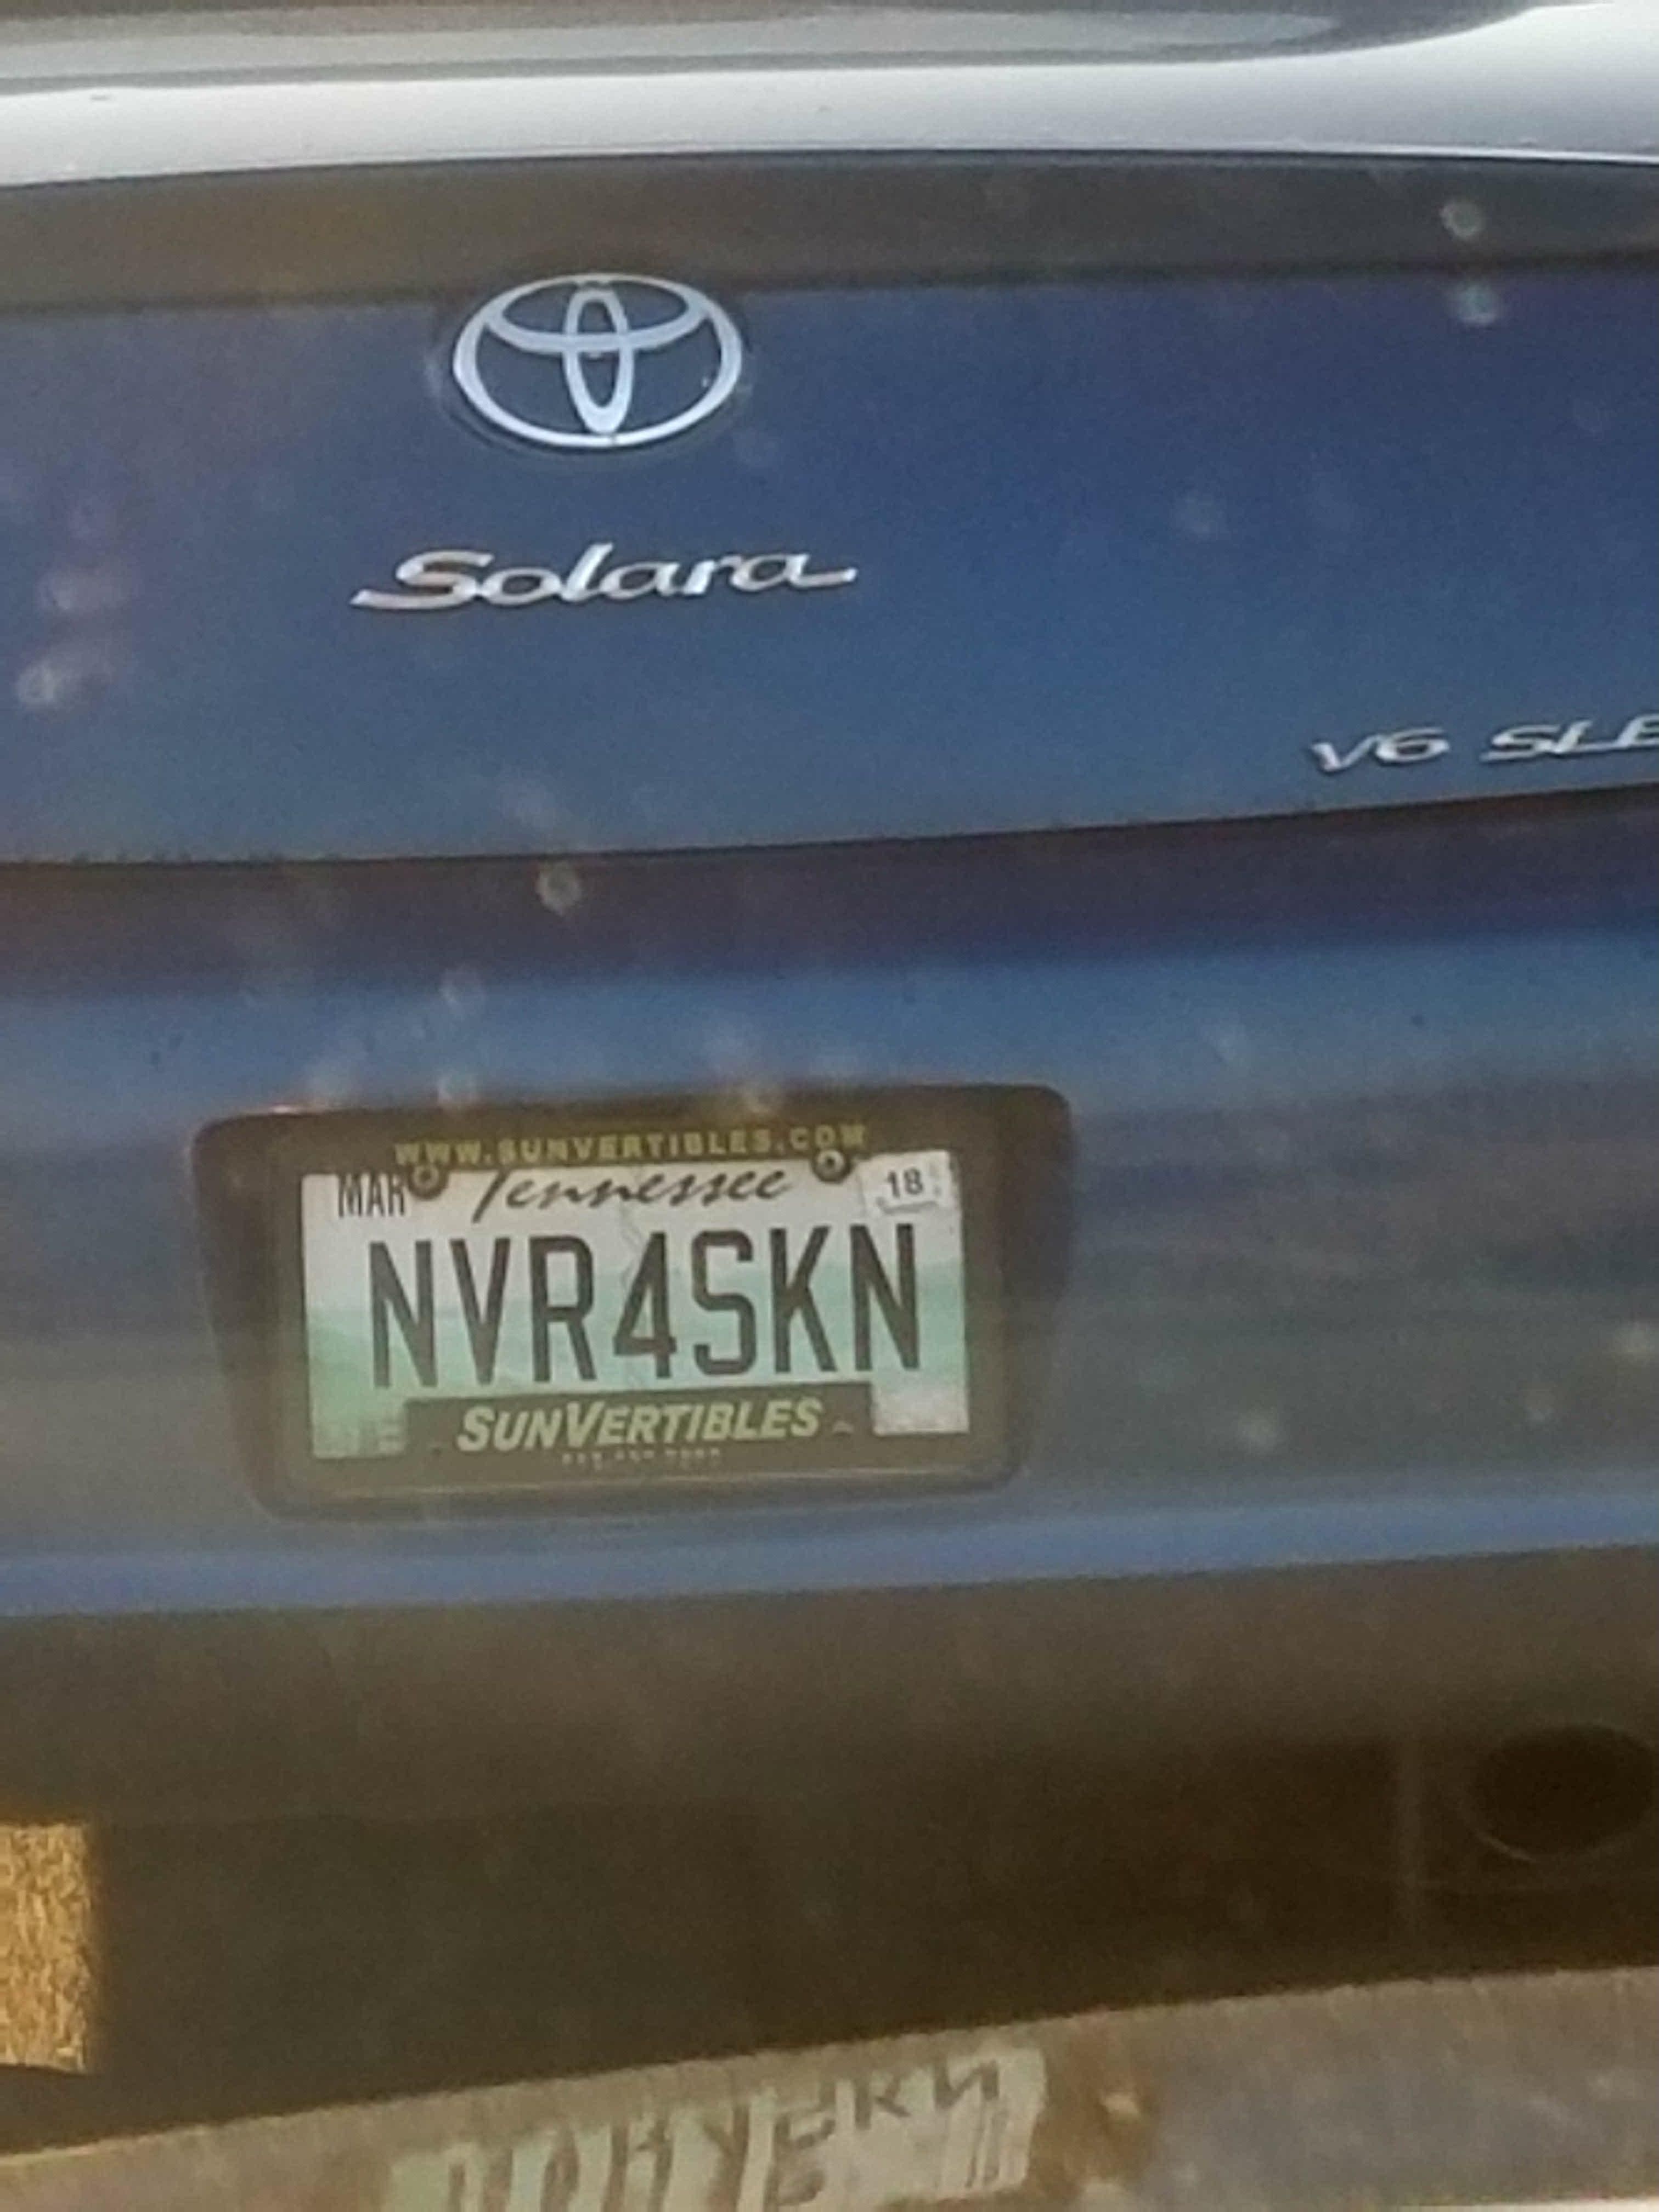 Saw this license plate and spent 5 minutes speculating on why the driver might be so staunchly pro-circumcision before eventually realizing this is probably meant to be "never forsaken."